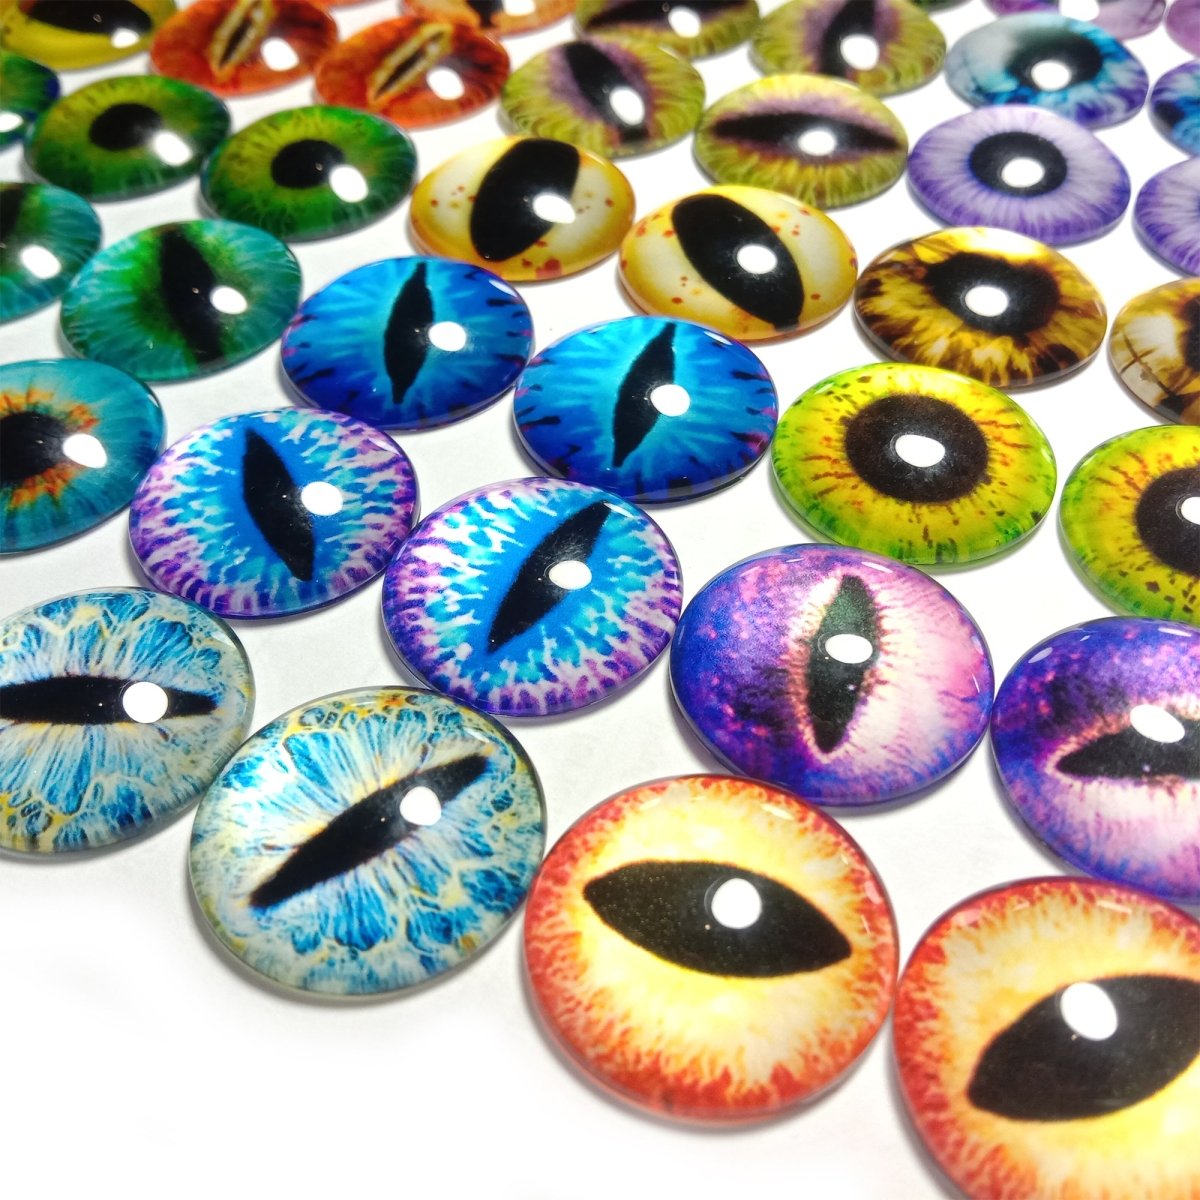 18mm 20mm 25mm 30mm Glass Eyes Dragon Lizard Frog Eyeballs As Pictured - 20mm 48pcs - - Asia Sell